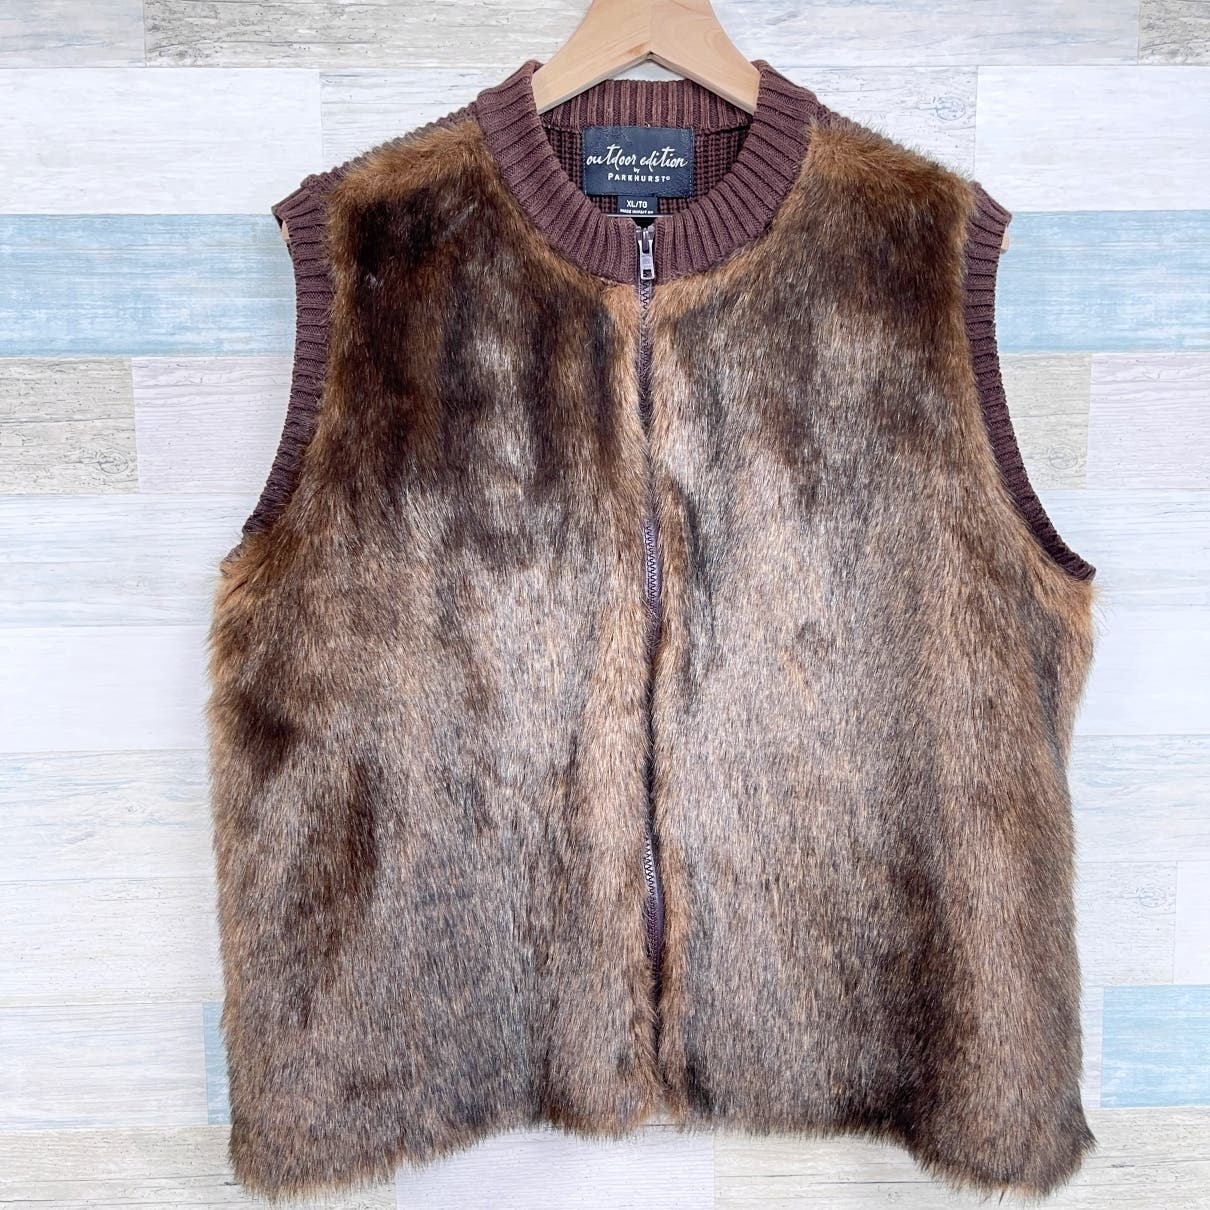 Primary image for Outdoor Edition Parkhurst Faux Fur Ribbed Vest Jacket Brown Zip VTG Womens XL